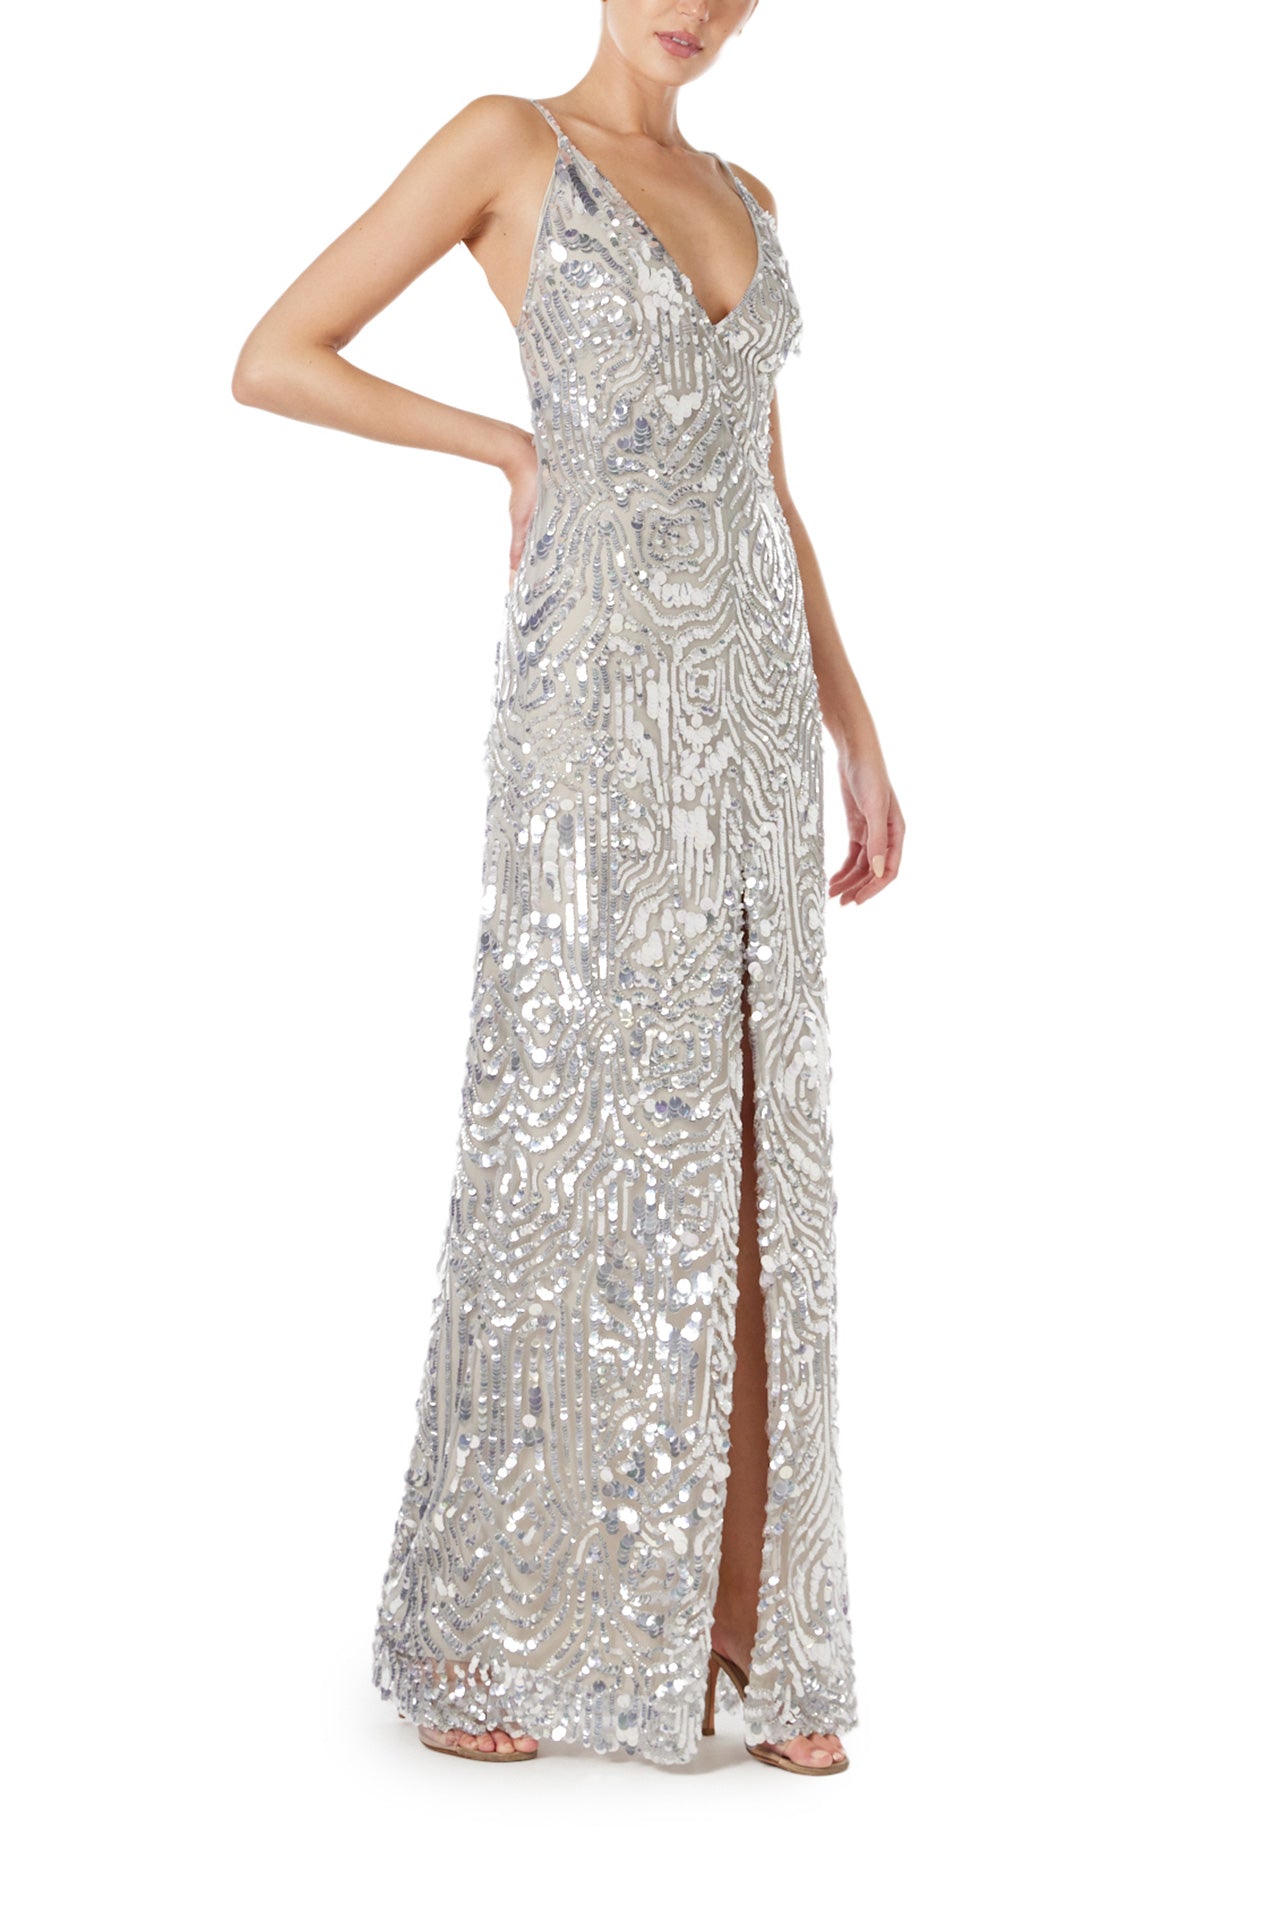 Monique Lhuillier Spring 2024 silver sequin slip gown with deep v neckline and high front slit - right side.